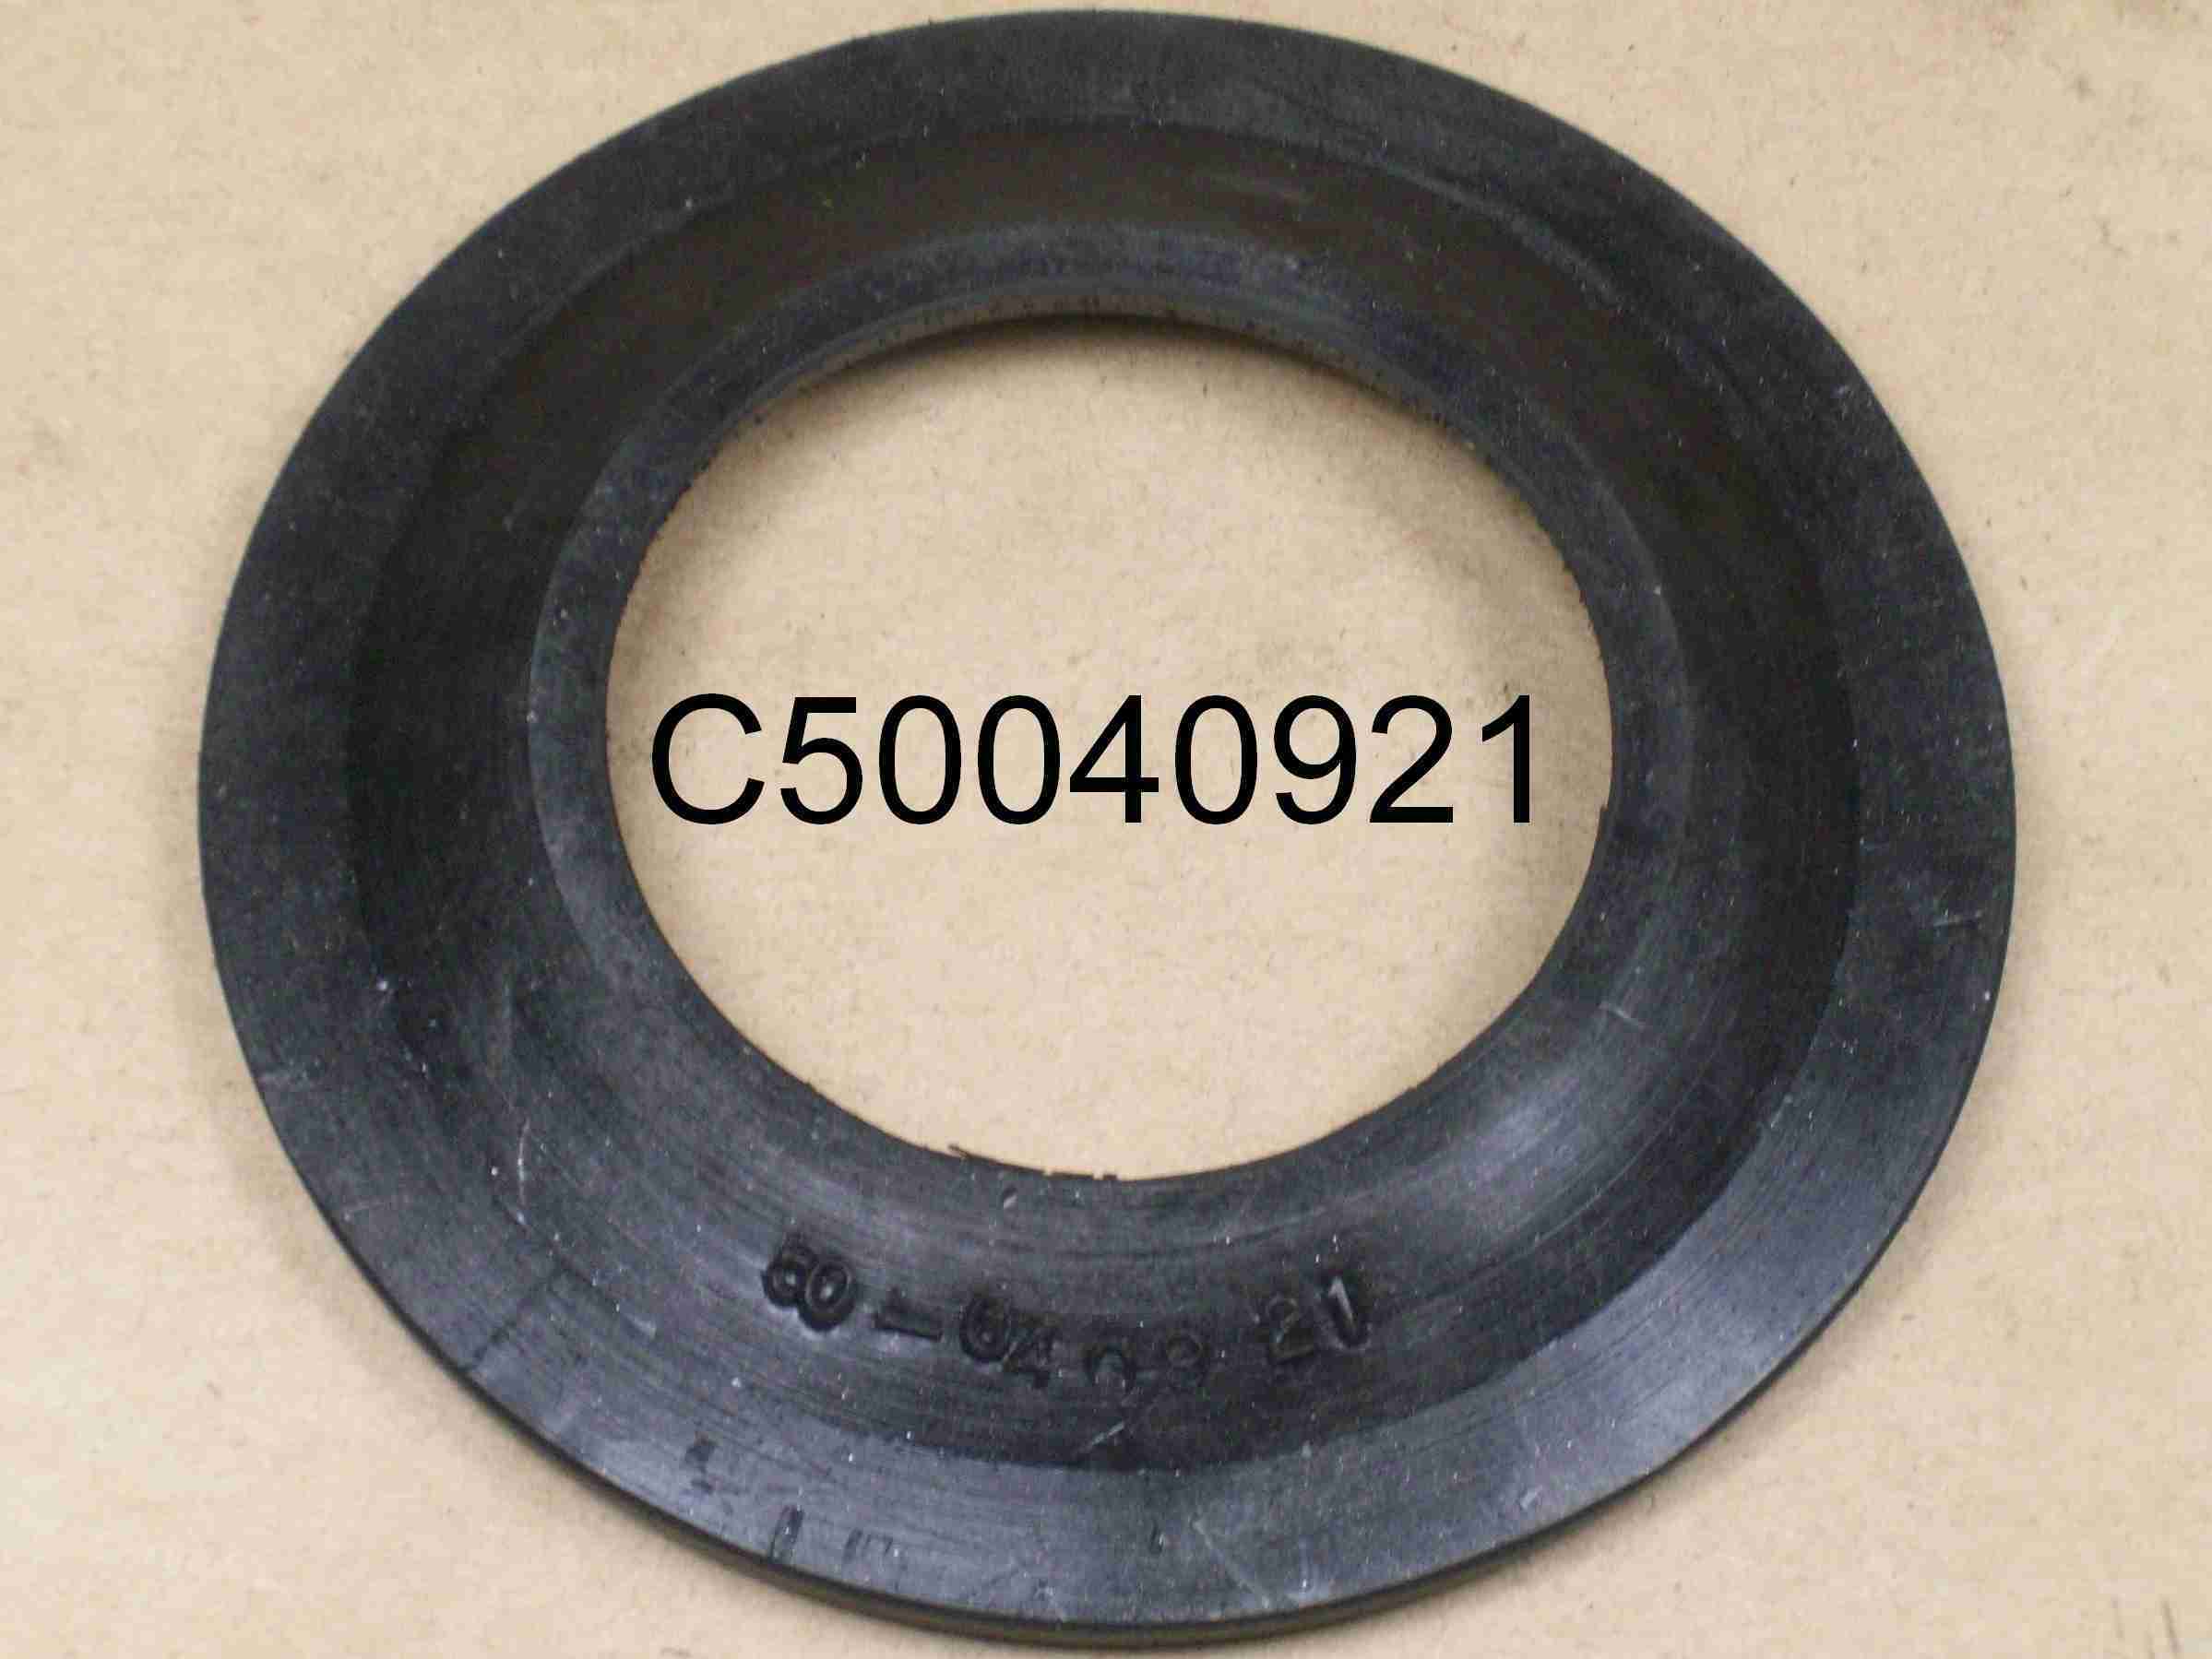 1939-52 Standard Steering Wheel Horn Contact Separator Rubber Grommet, 1937-39 All, 1940 All exc Mdl 29, 1941-52 All